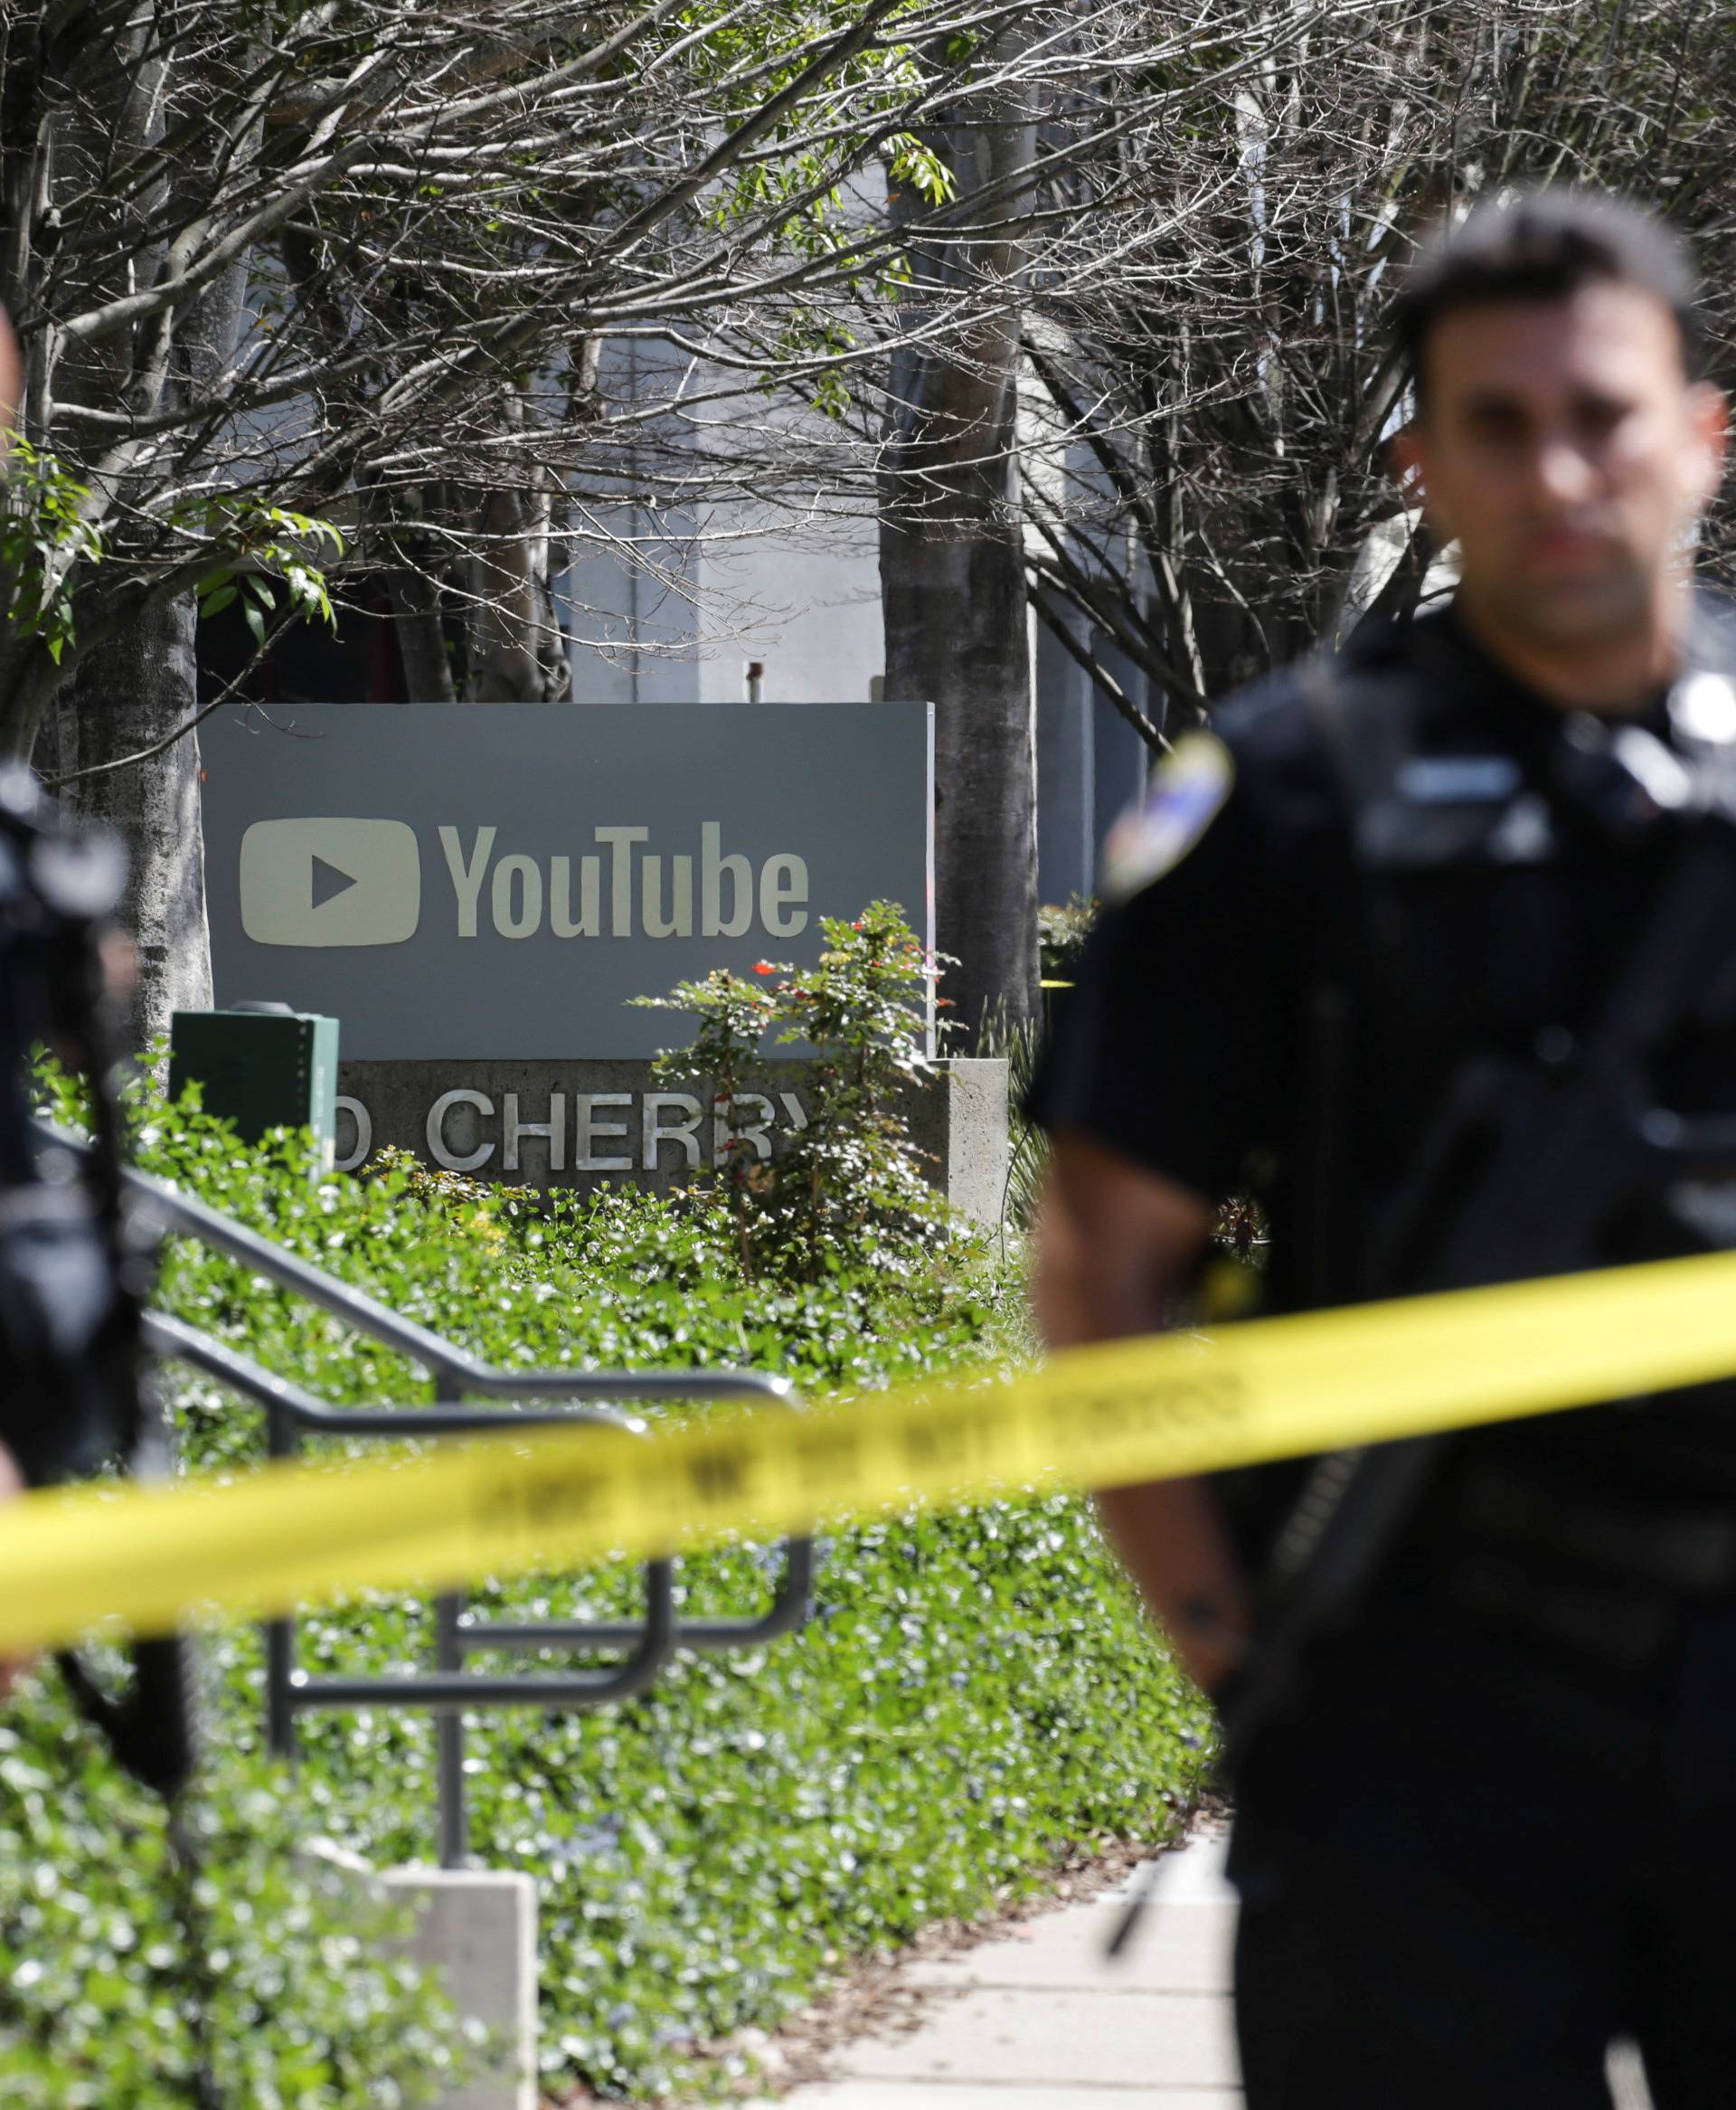 Police officers and crime scene tape are seen at Youtube headquarters following an active shooter situation in San Bruno, California